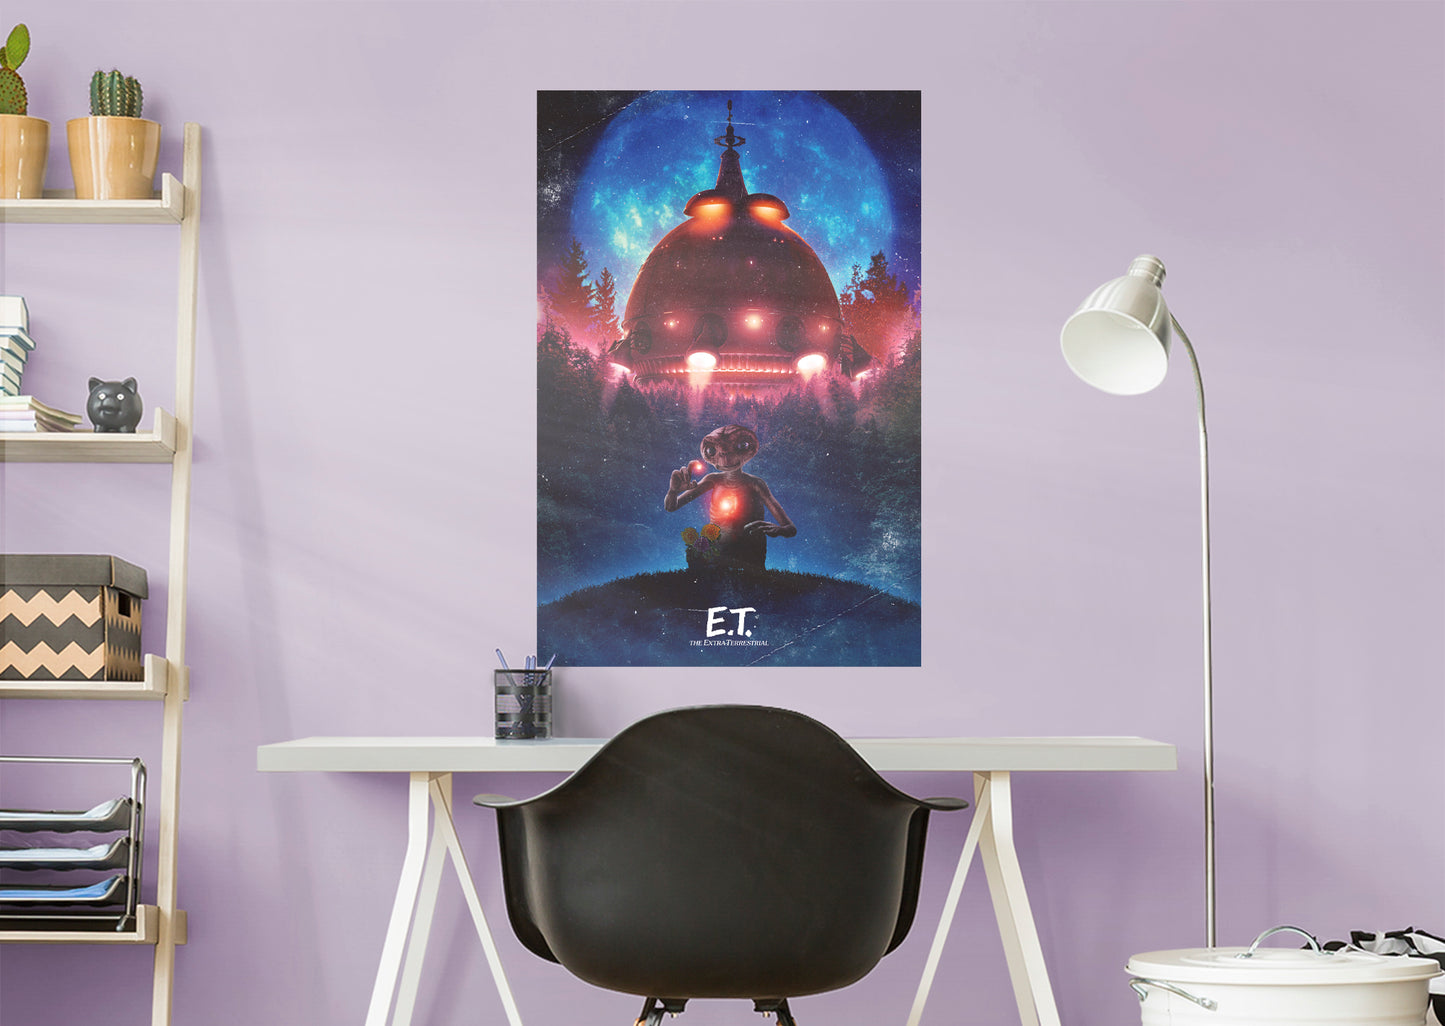 E.T.: E.T. Spacecraft 40th Anniversary Poster        - Officially Licensed NBC Universal Removable     Adhesive Decal